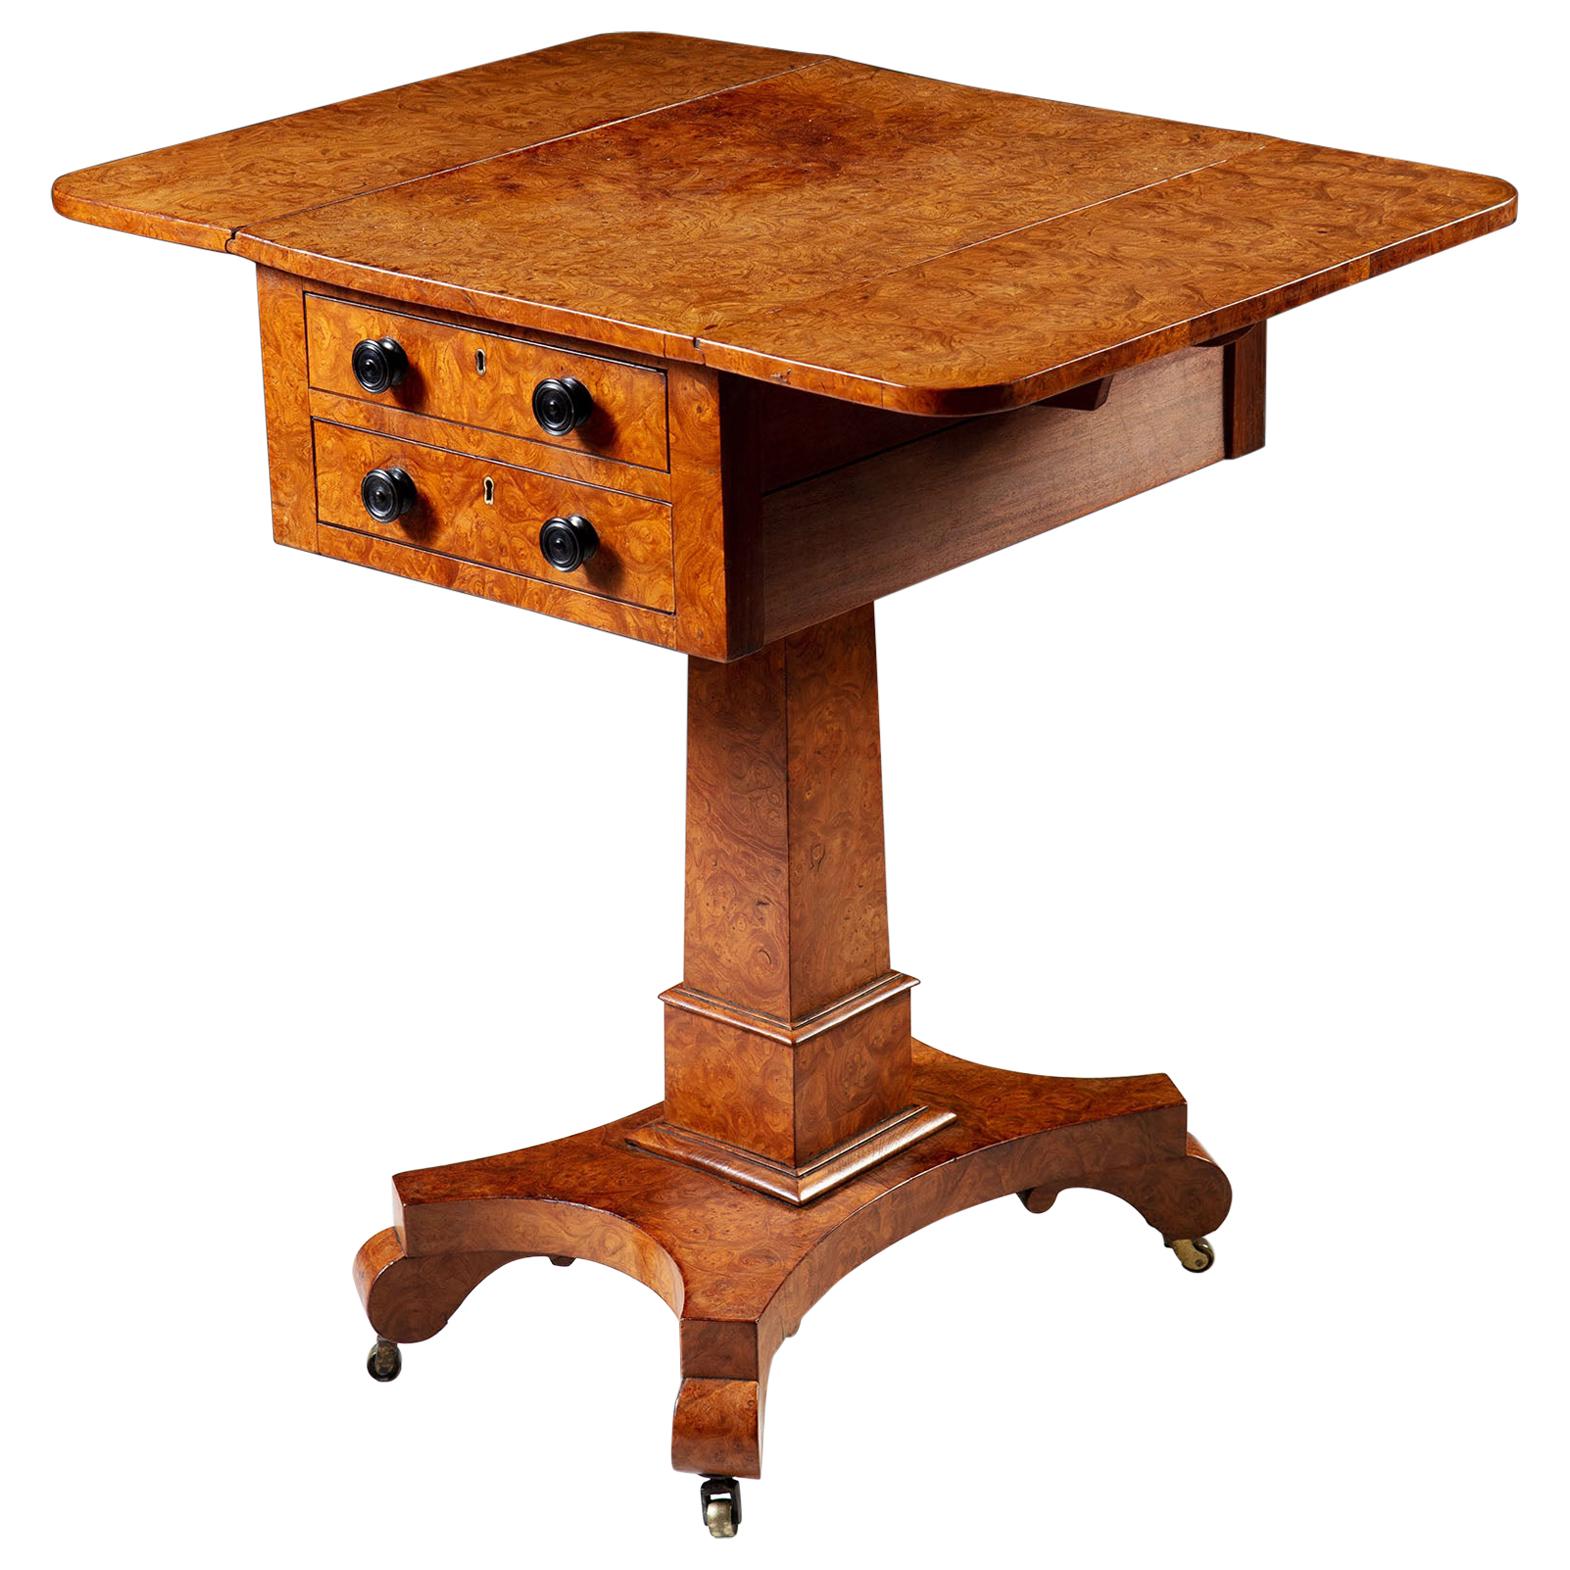 19th Century Burr Ashwood Work Table with Drop Leaf Sides and Drawers